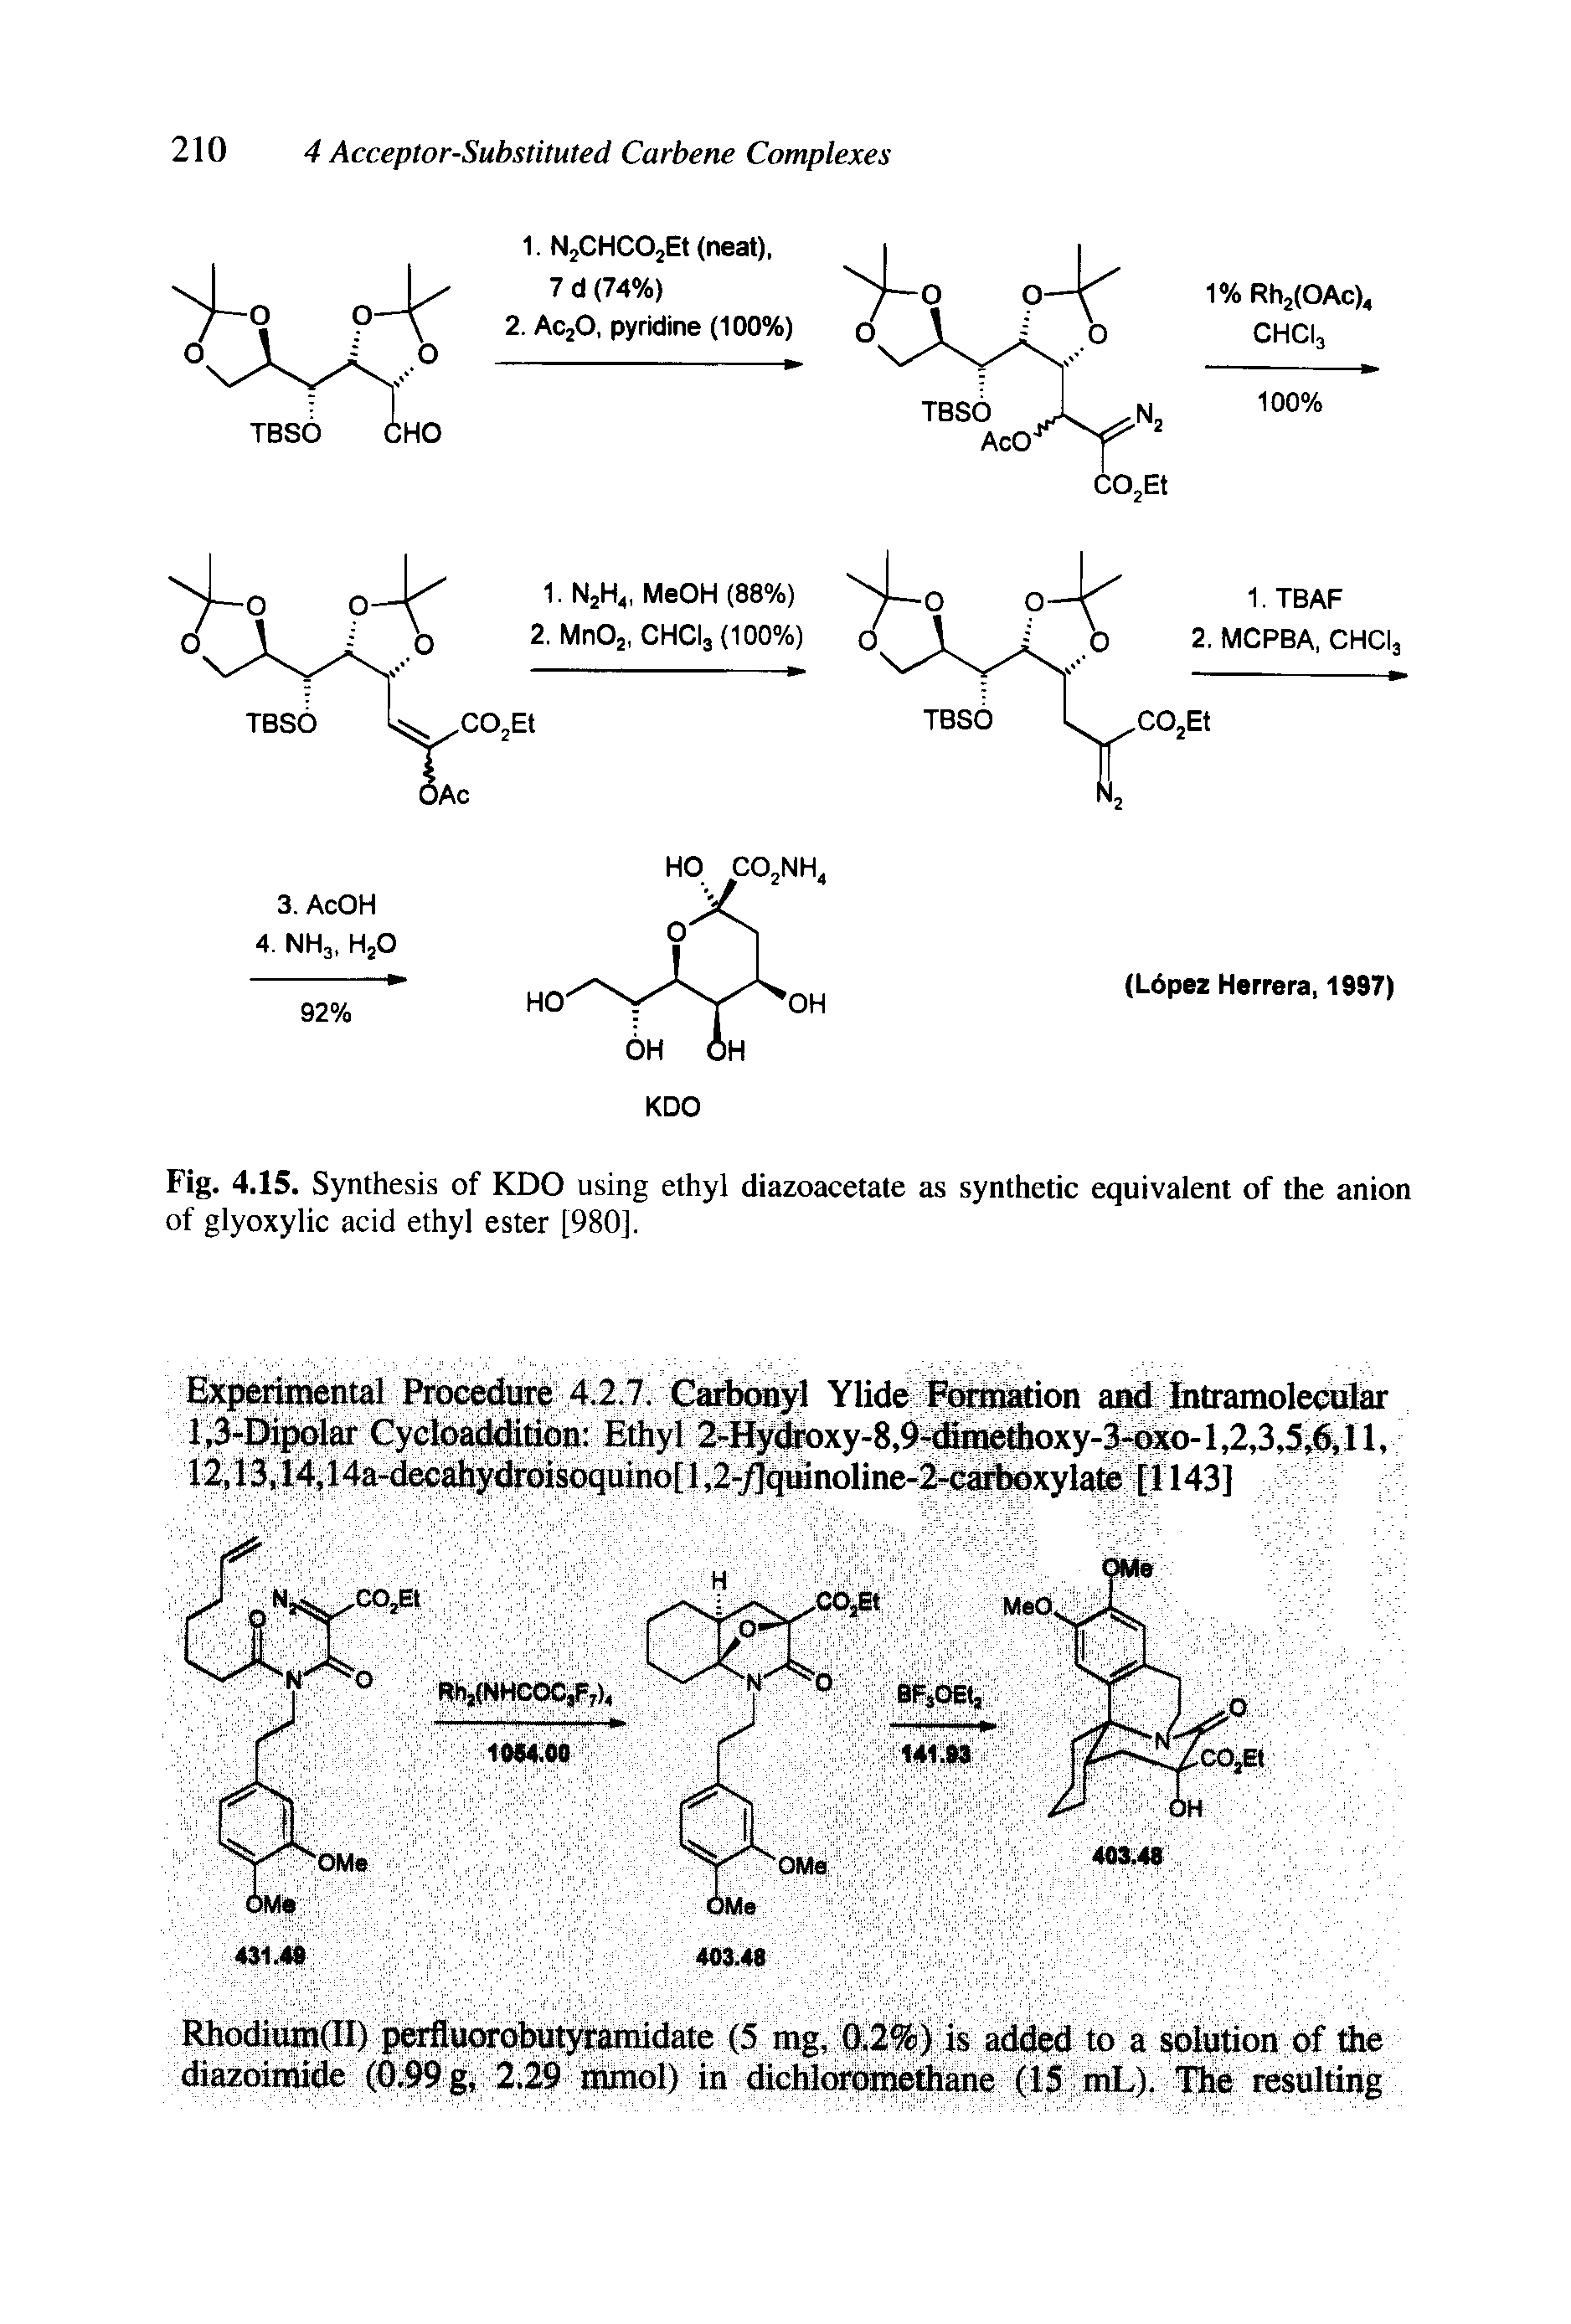 Fig. 4.15. Synthesis of KDO using ethyl diazoacetate as synthetic equivalent of the anion of glyoxylic acid ethyl ester [980].